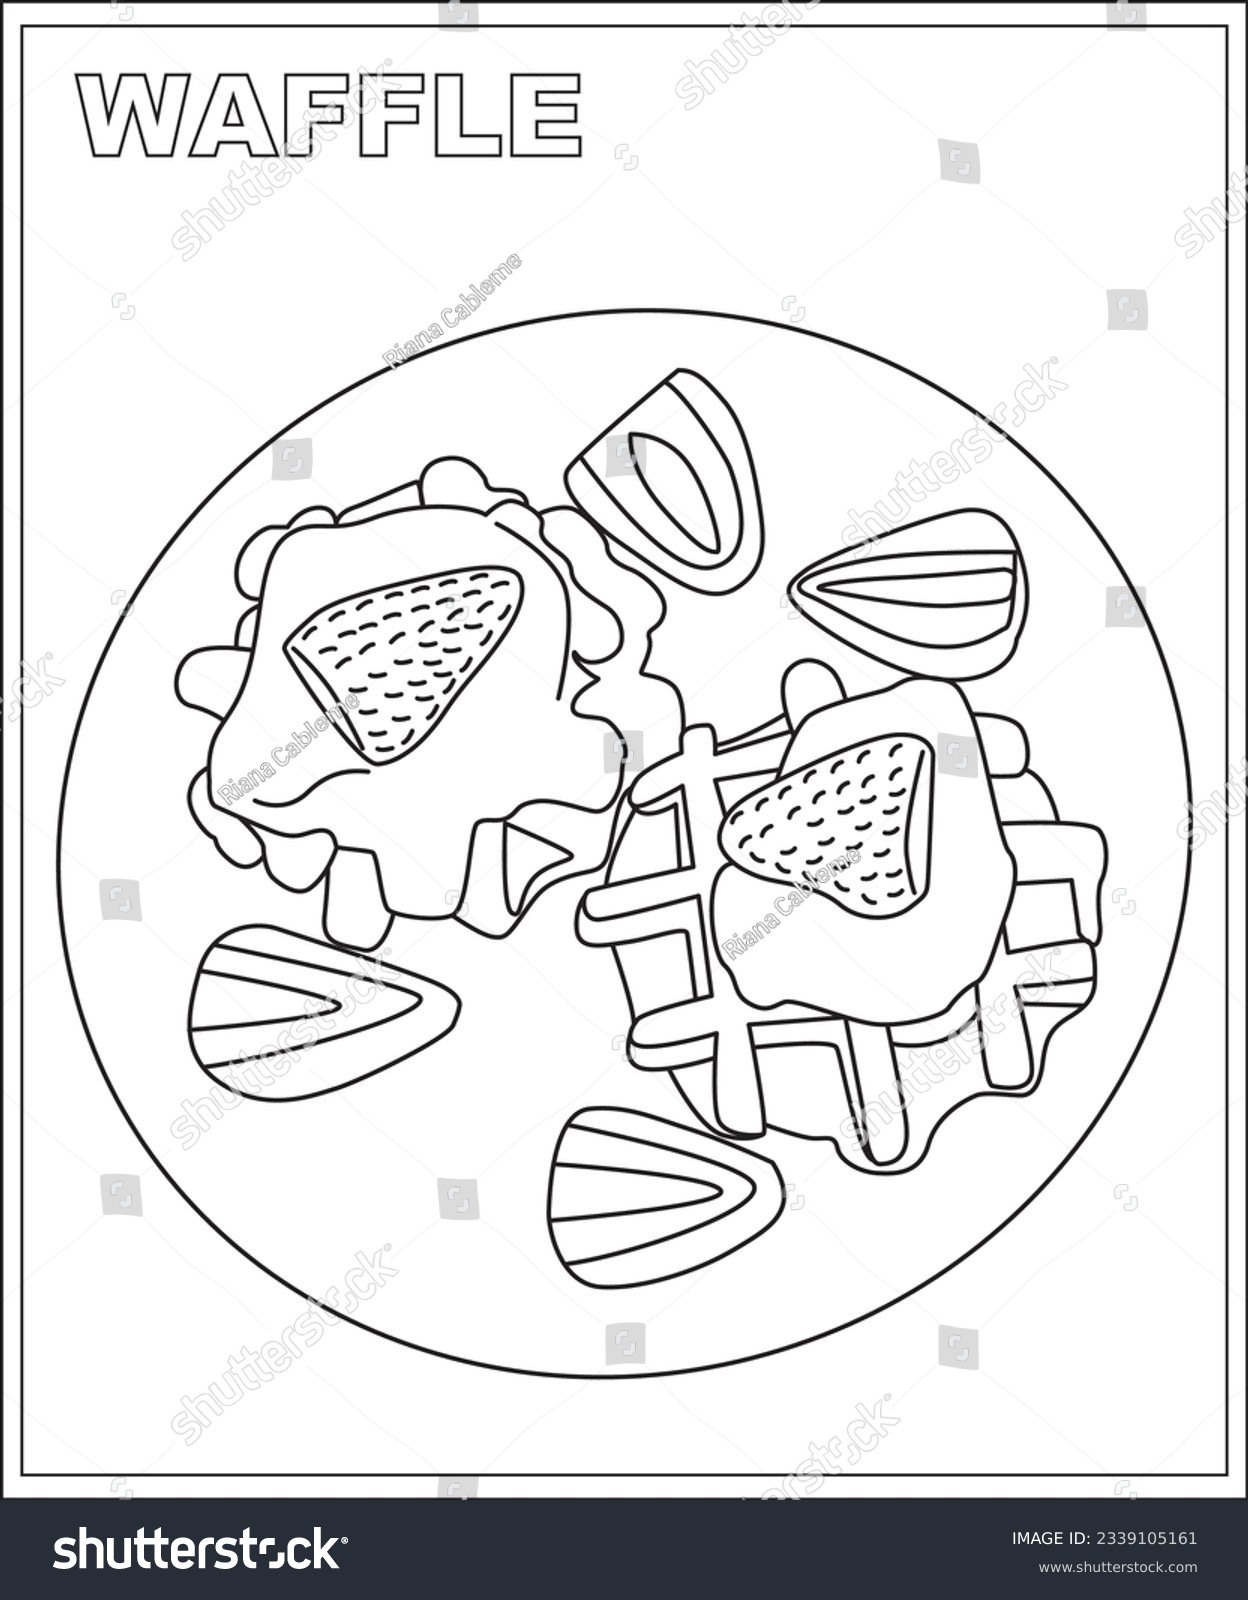 Waffle coloring book children food coloring stock vector royalty free